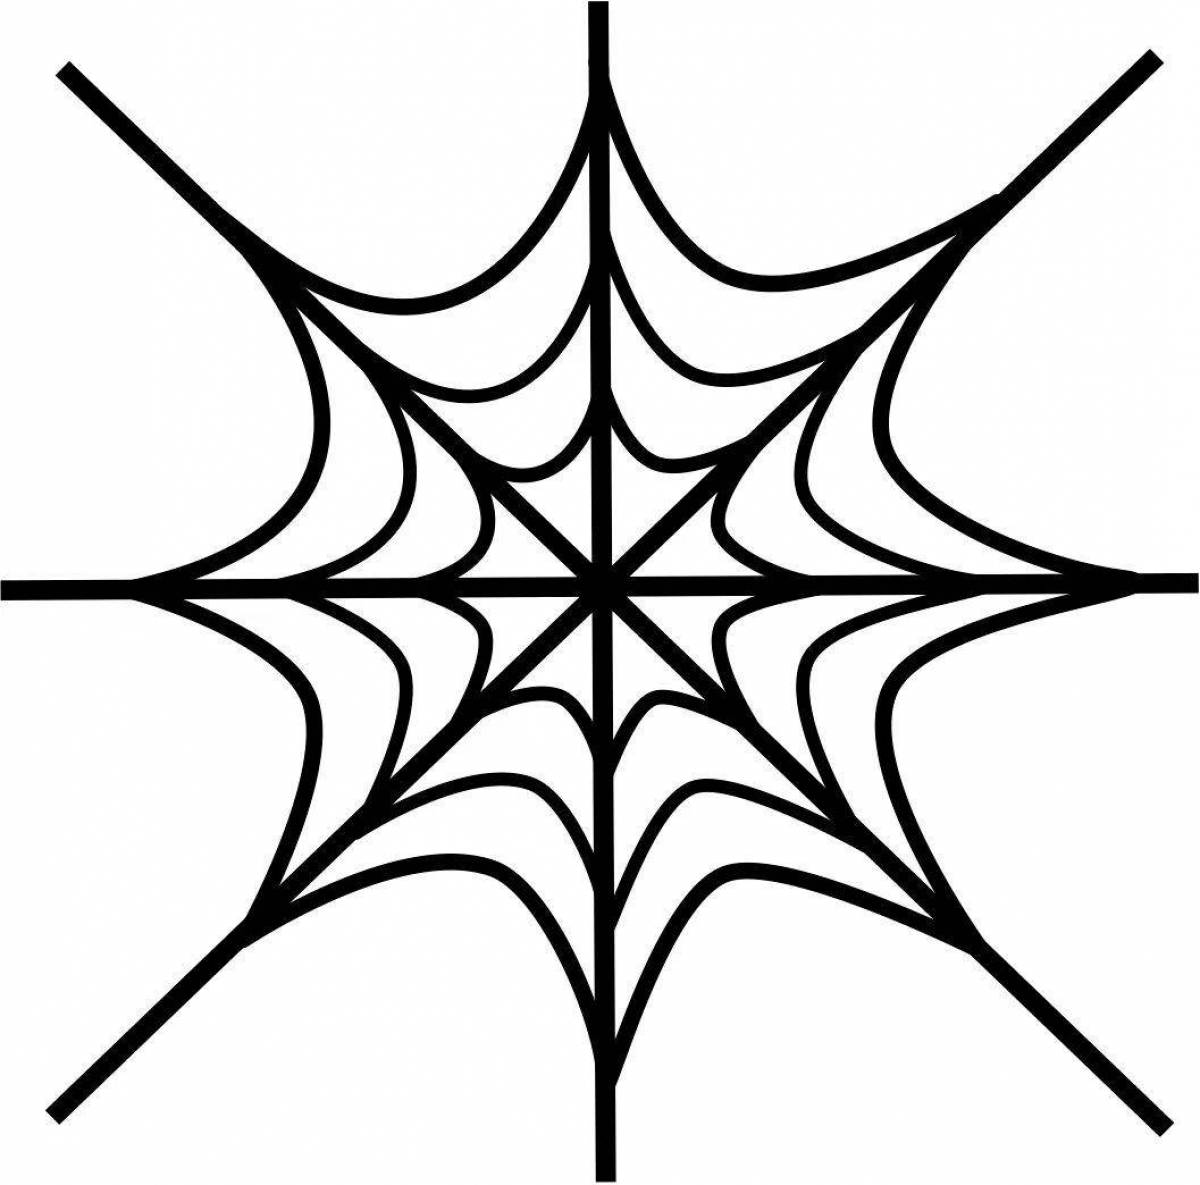 Intricate web coloring for kids